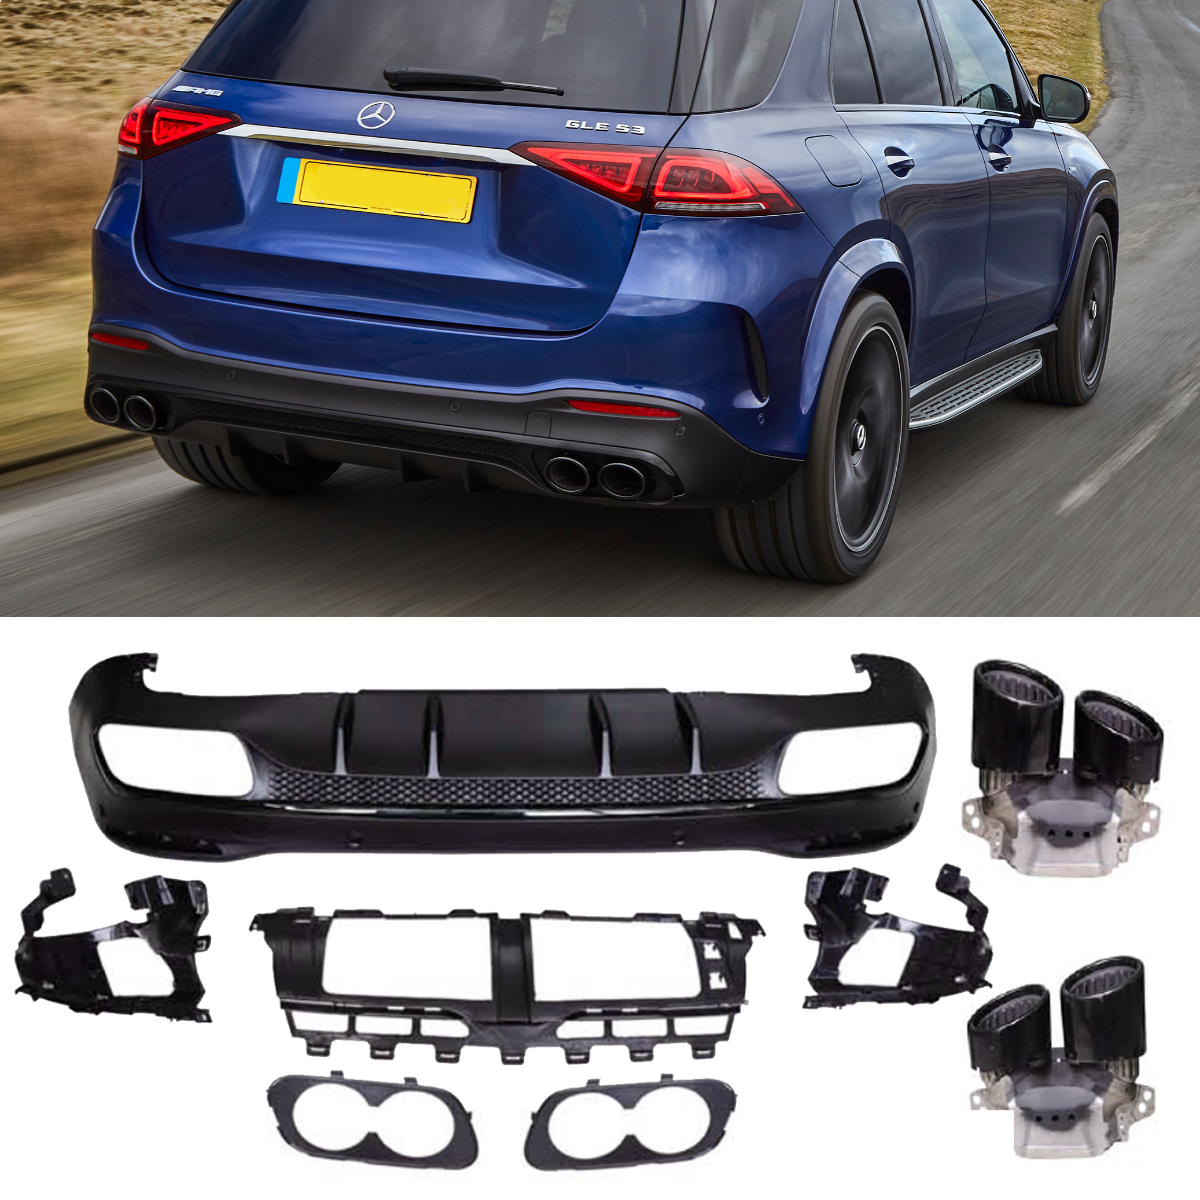 Rear diffuser & exhaust tips GLE 53 AMG Look for Mercedes W167 GLE SUV